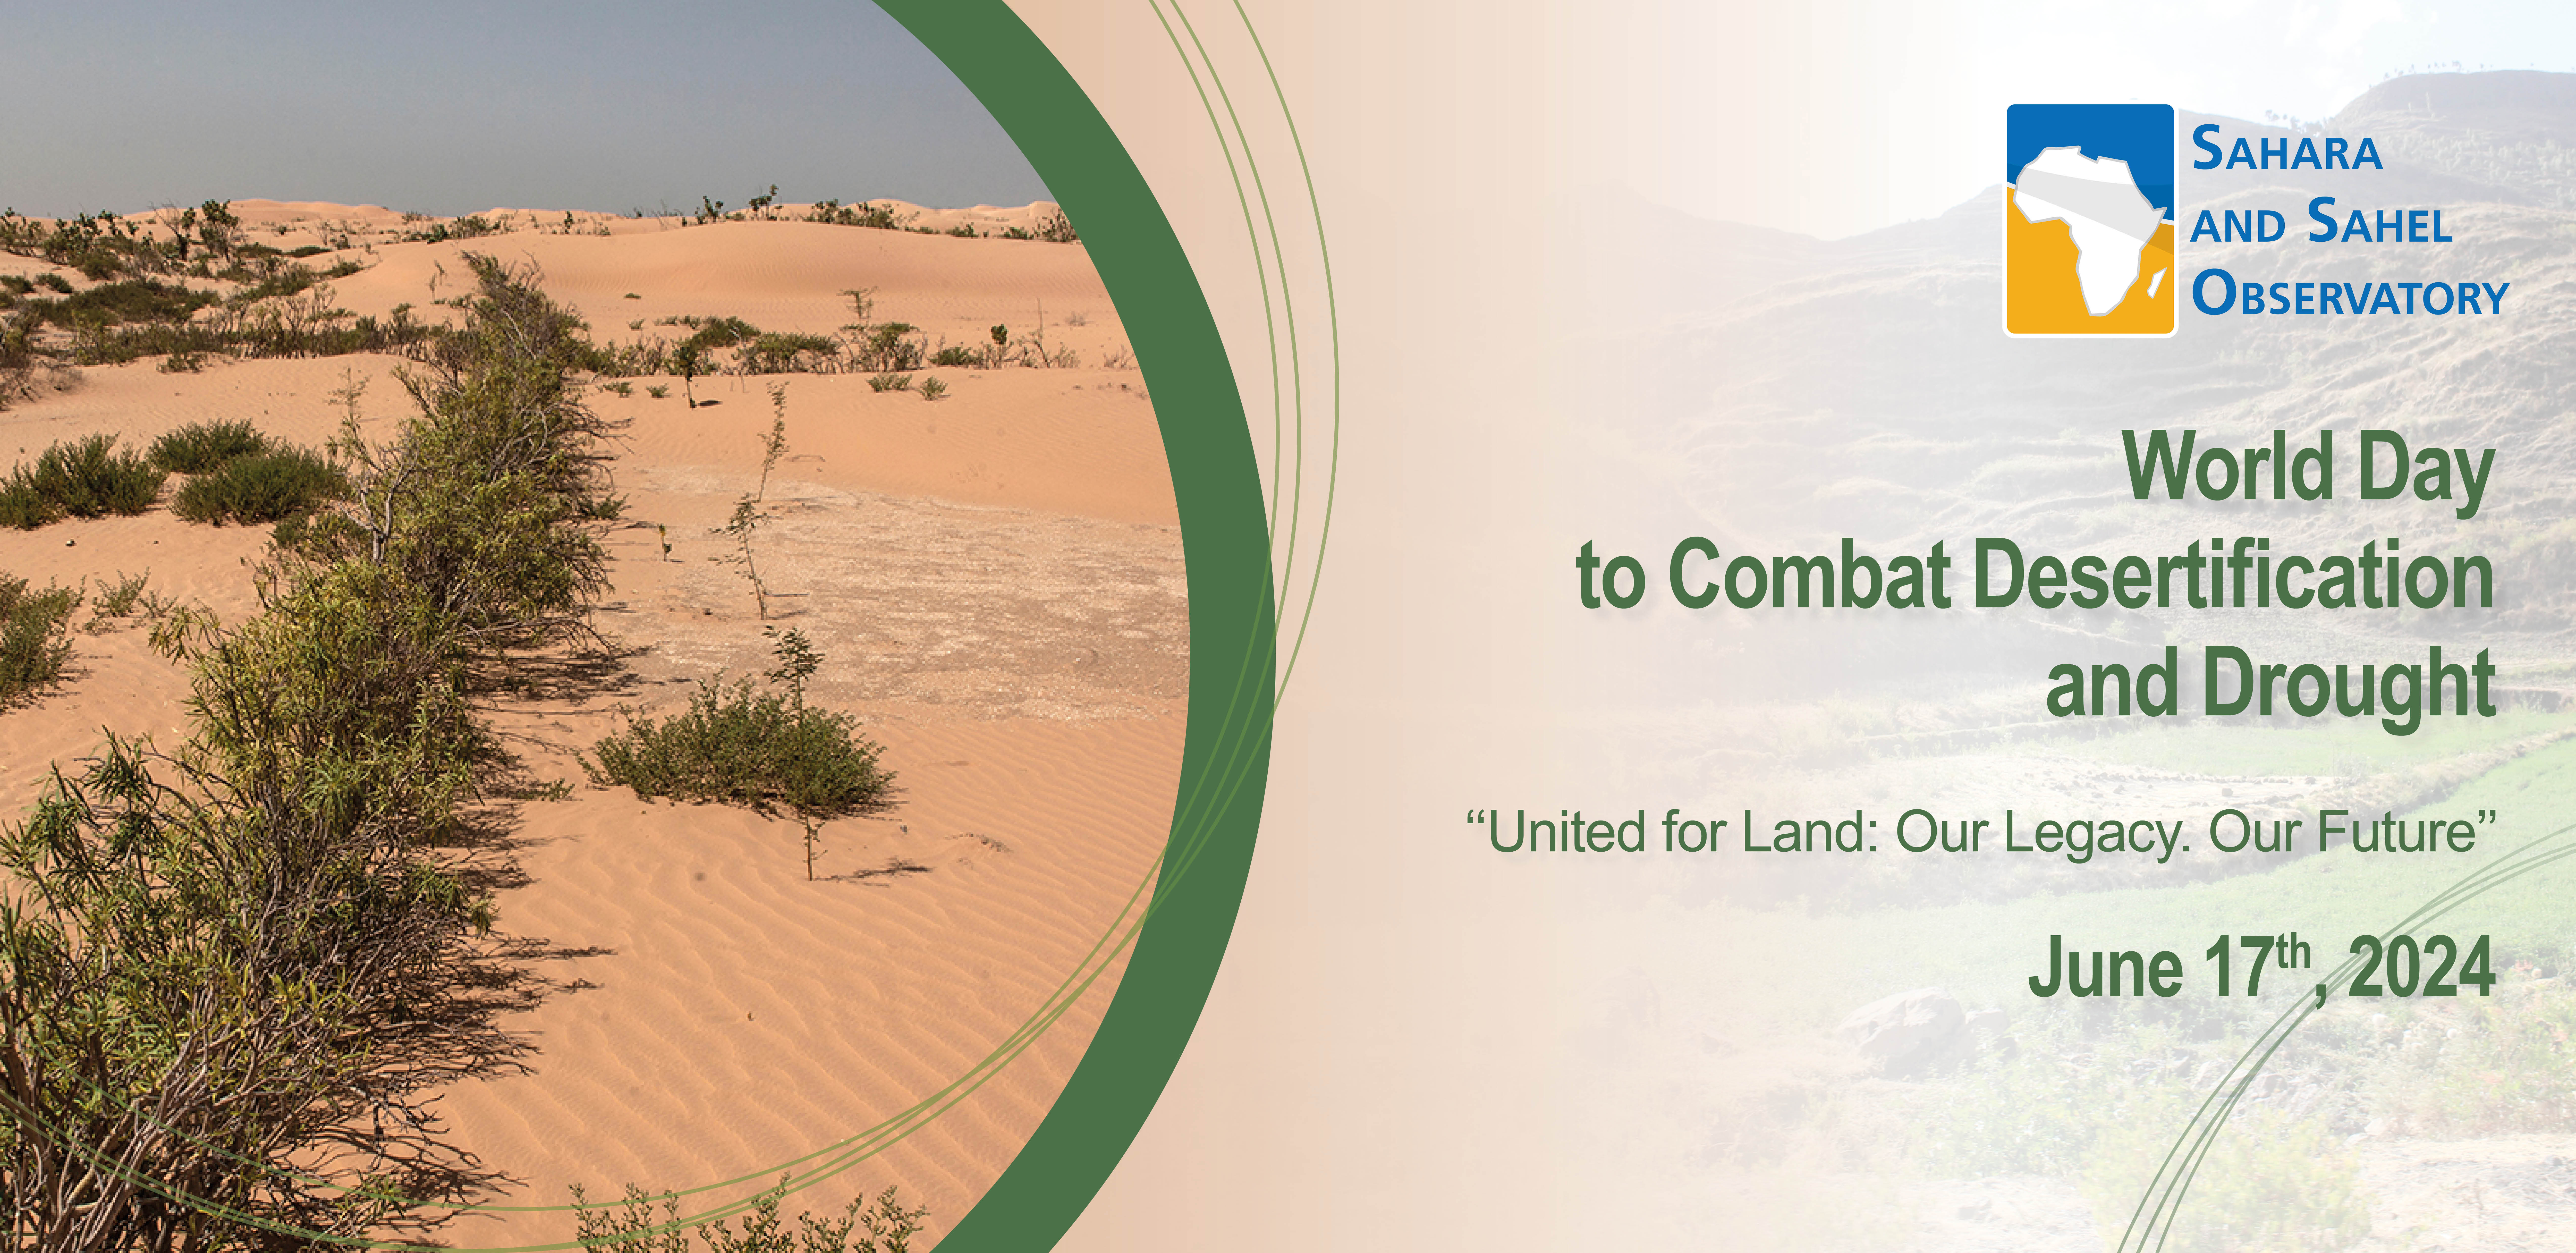 World Day to Combat Desertification and Drought - June 17, 2024 “United for Land: Our Legacy. Our Future”